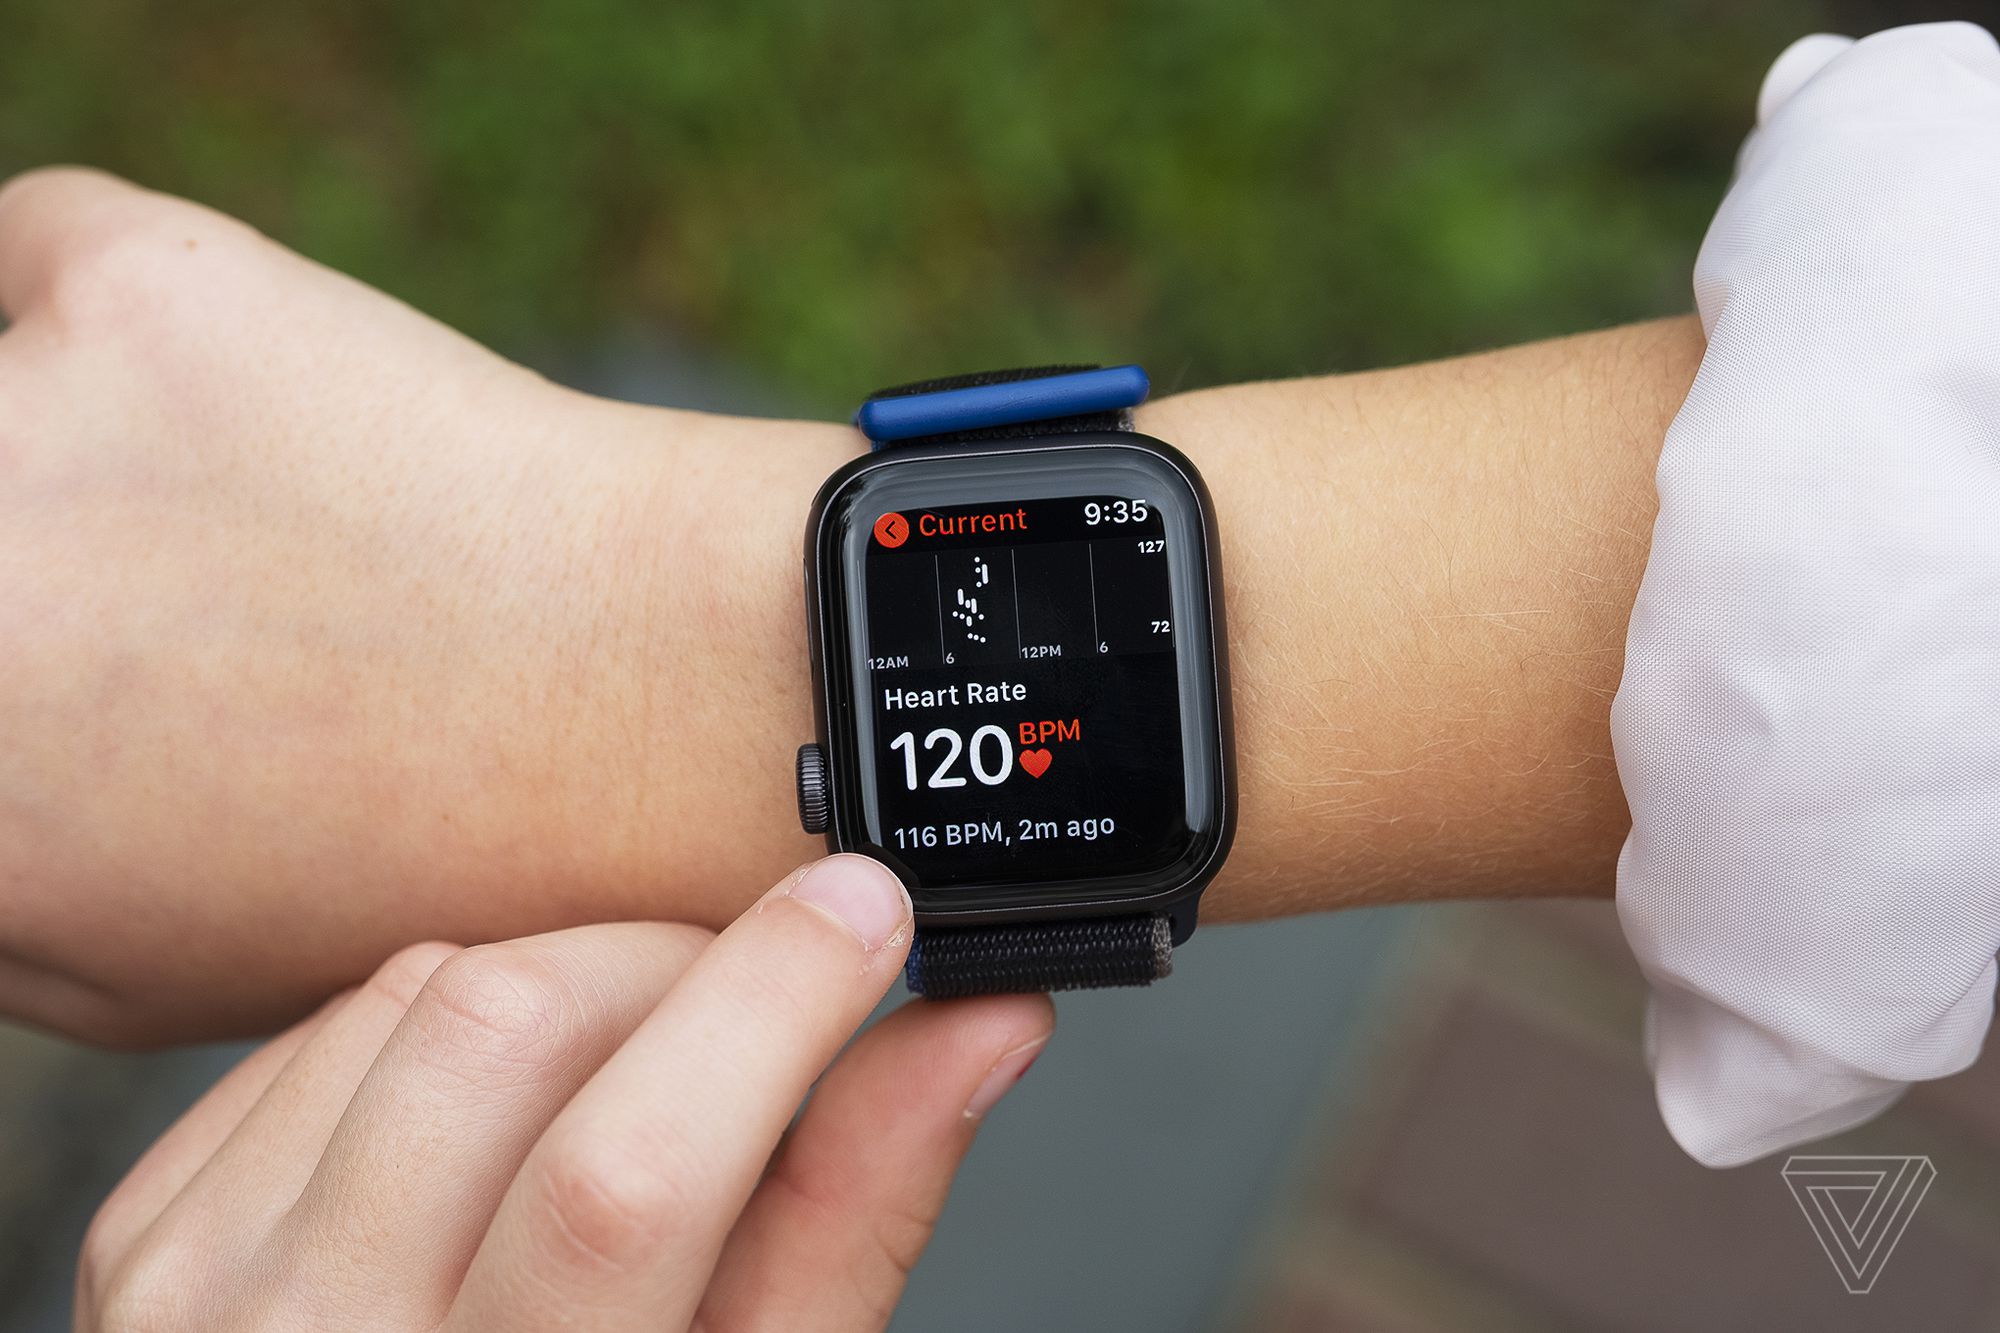 The capabilities and limitations of wearable technology in assessing heart health